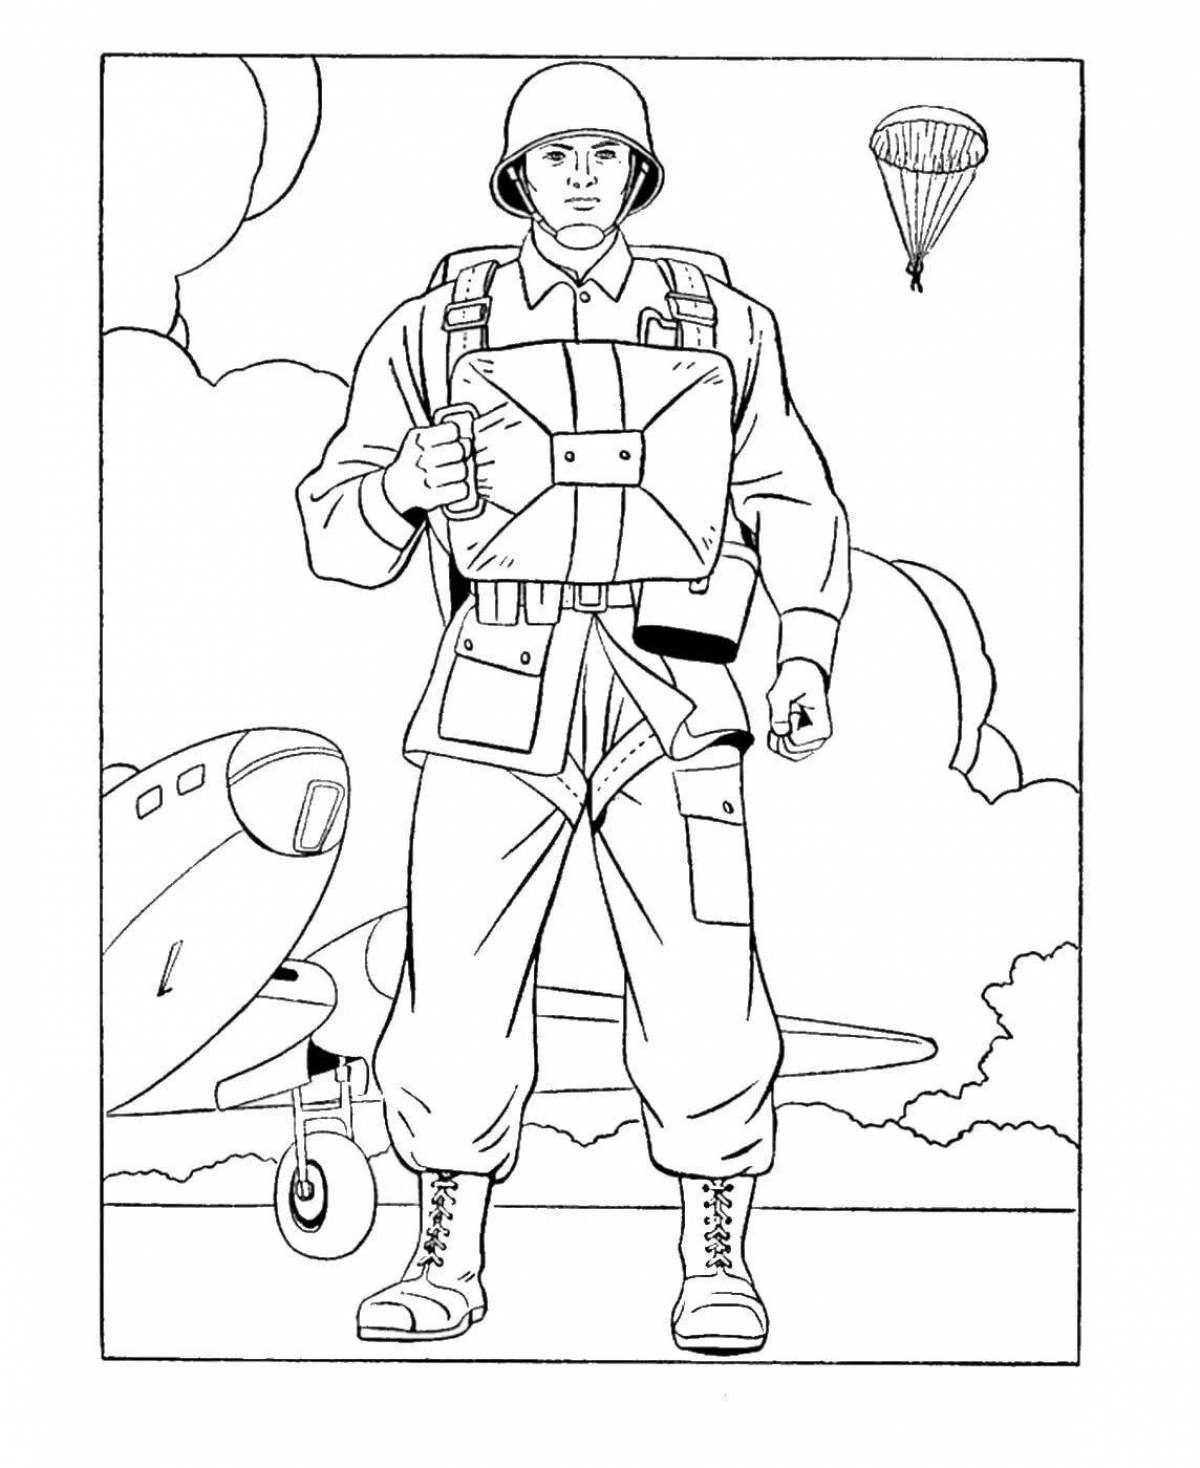 Combat soldier coloring page February 23